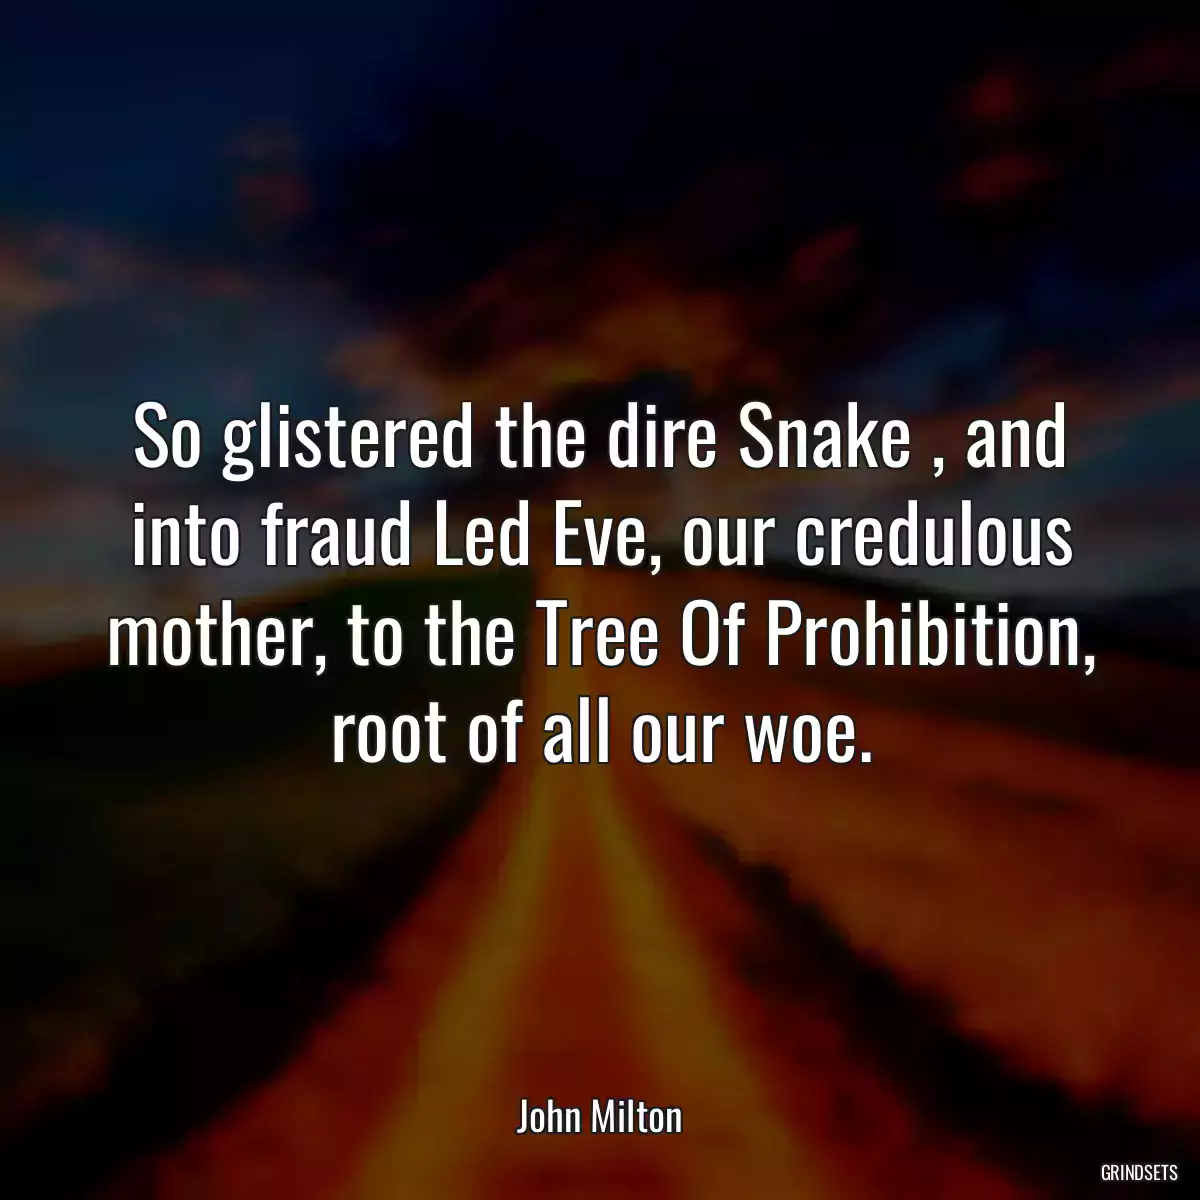 So glistered the dire Snake , and into fraud Led Eve, our credulous mother, to the Tree Of Prohibition, root of all our woe.